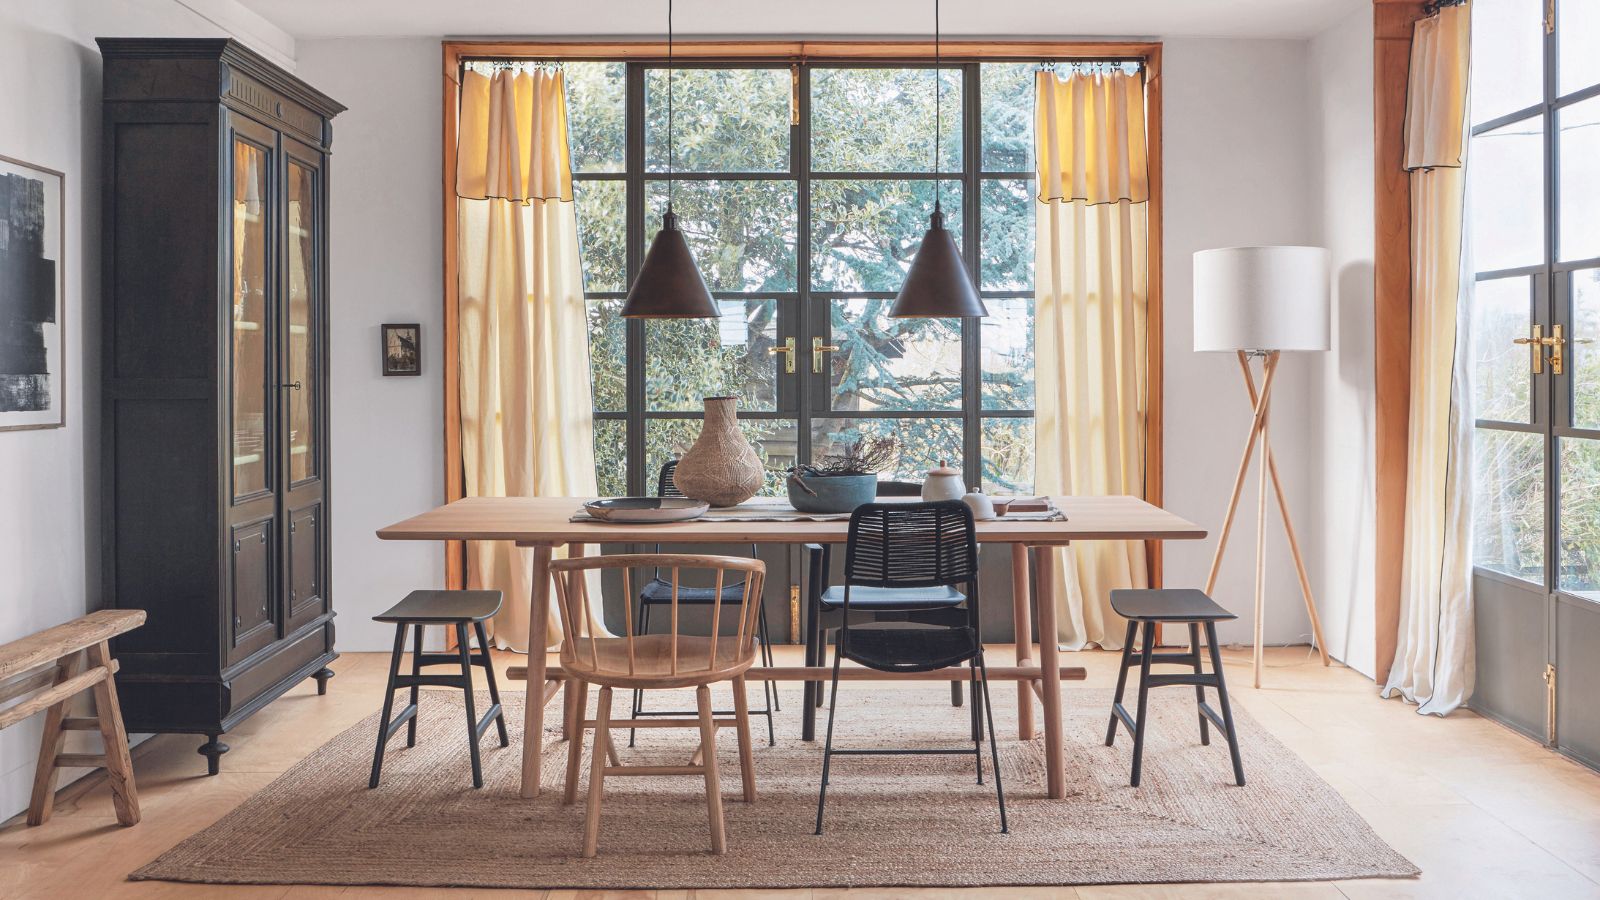 How To Style A Dining Room Table When Not In Use